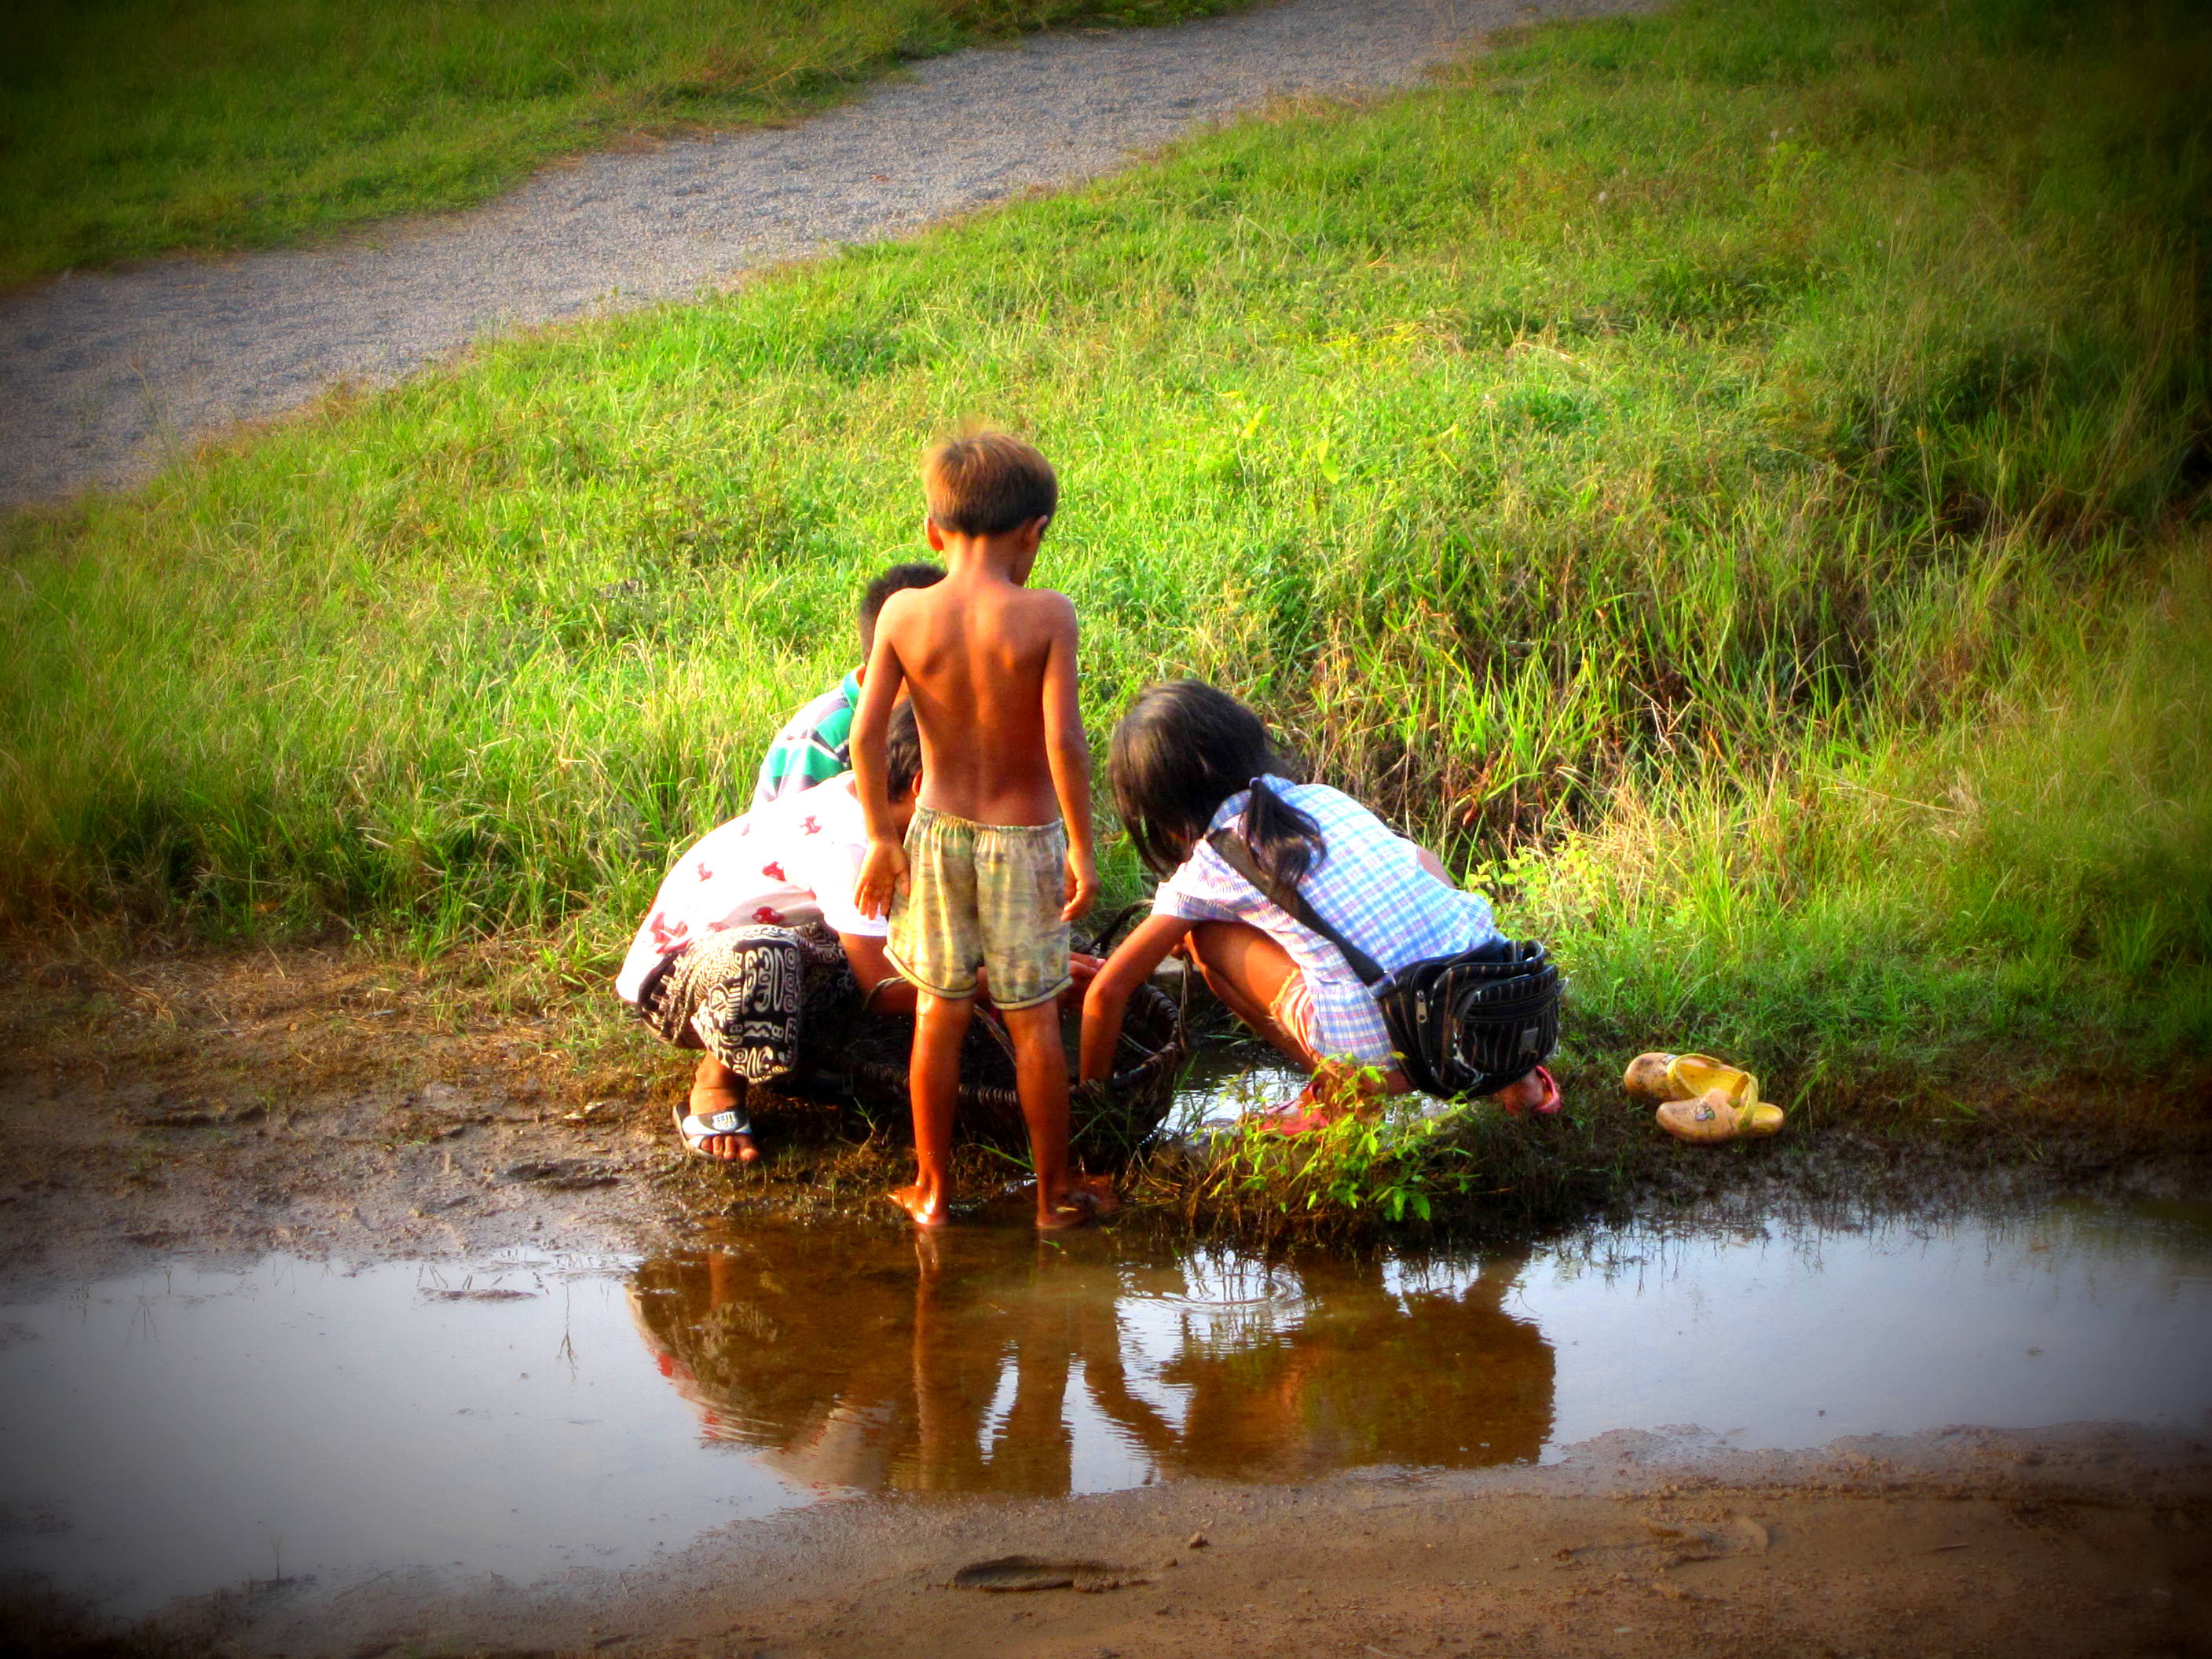 Cambodian children catching frogs